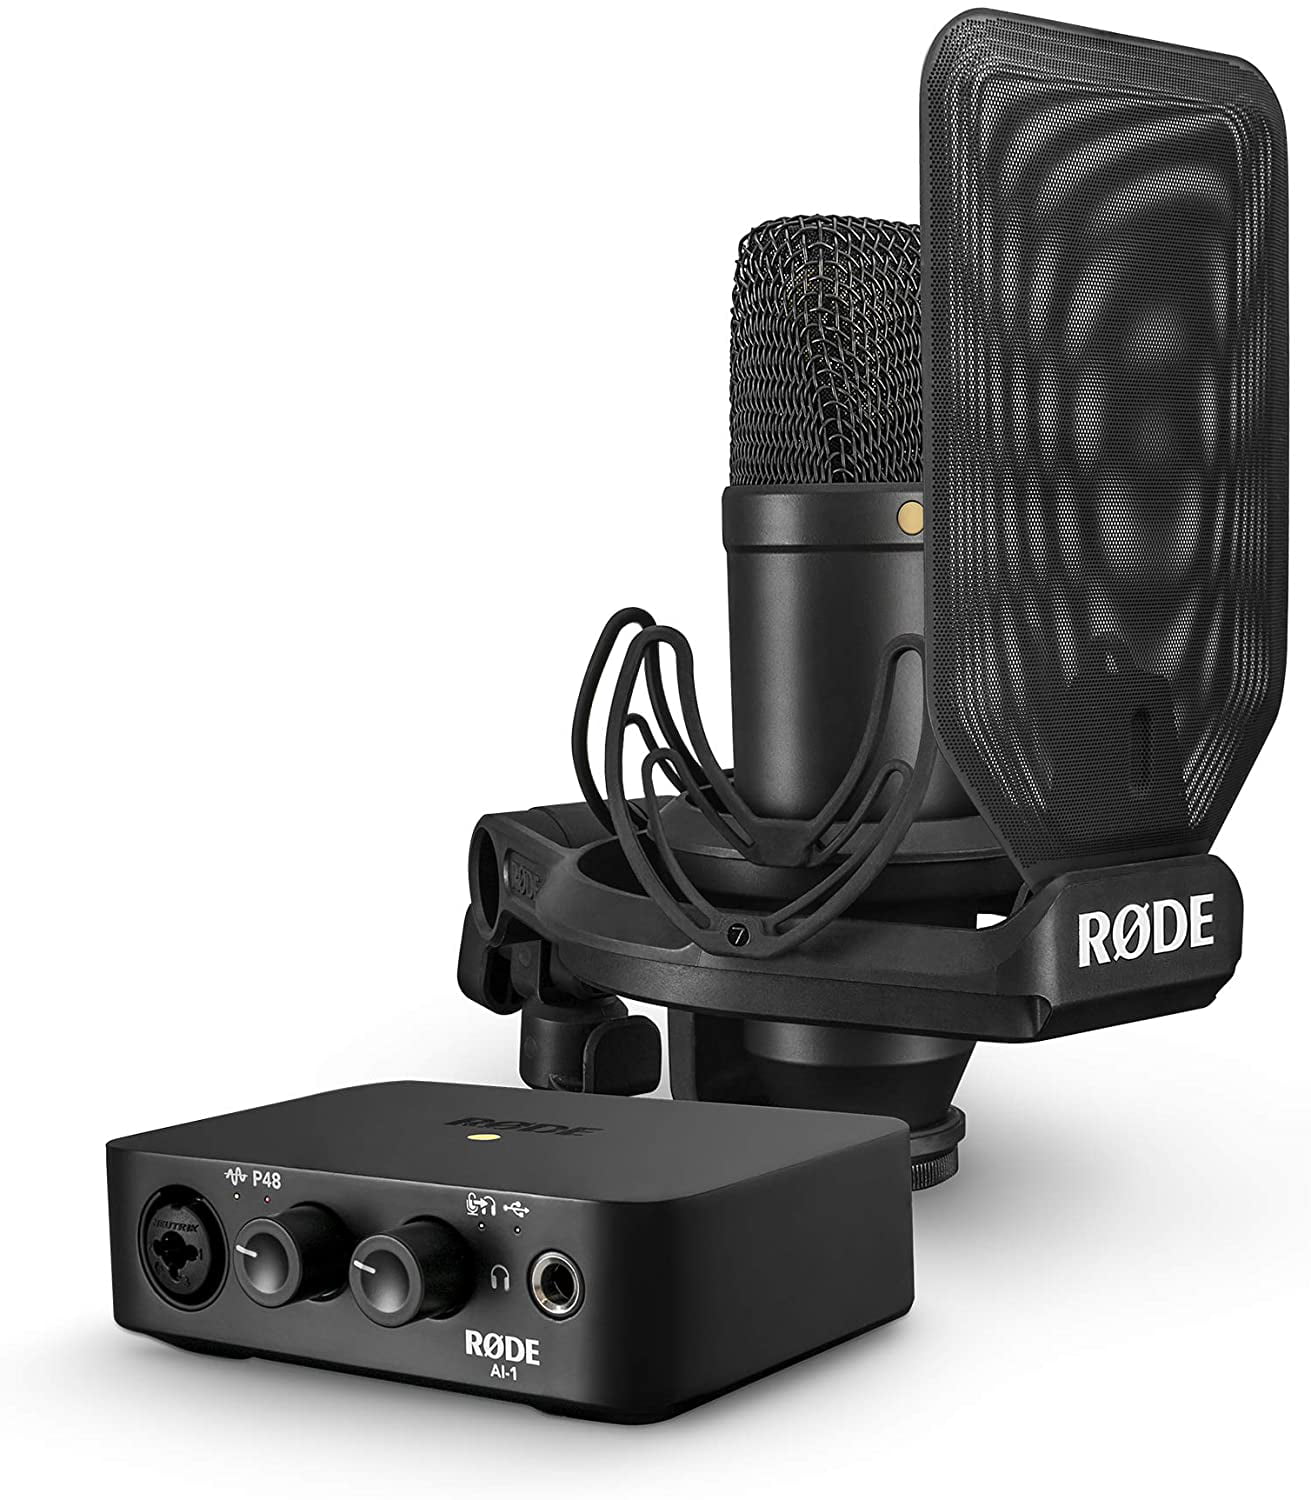 Rode Complete Studio Kit with AI-1 Audio Interface, NT1 Microphone, SMR  Shockmount, Cables + Boom Stand + Headphones + Cleaning Kit